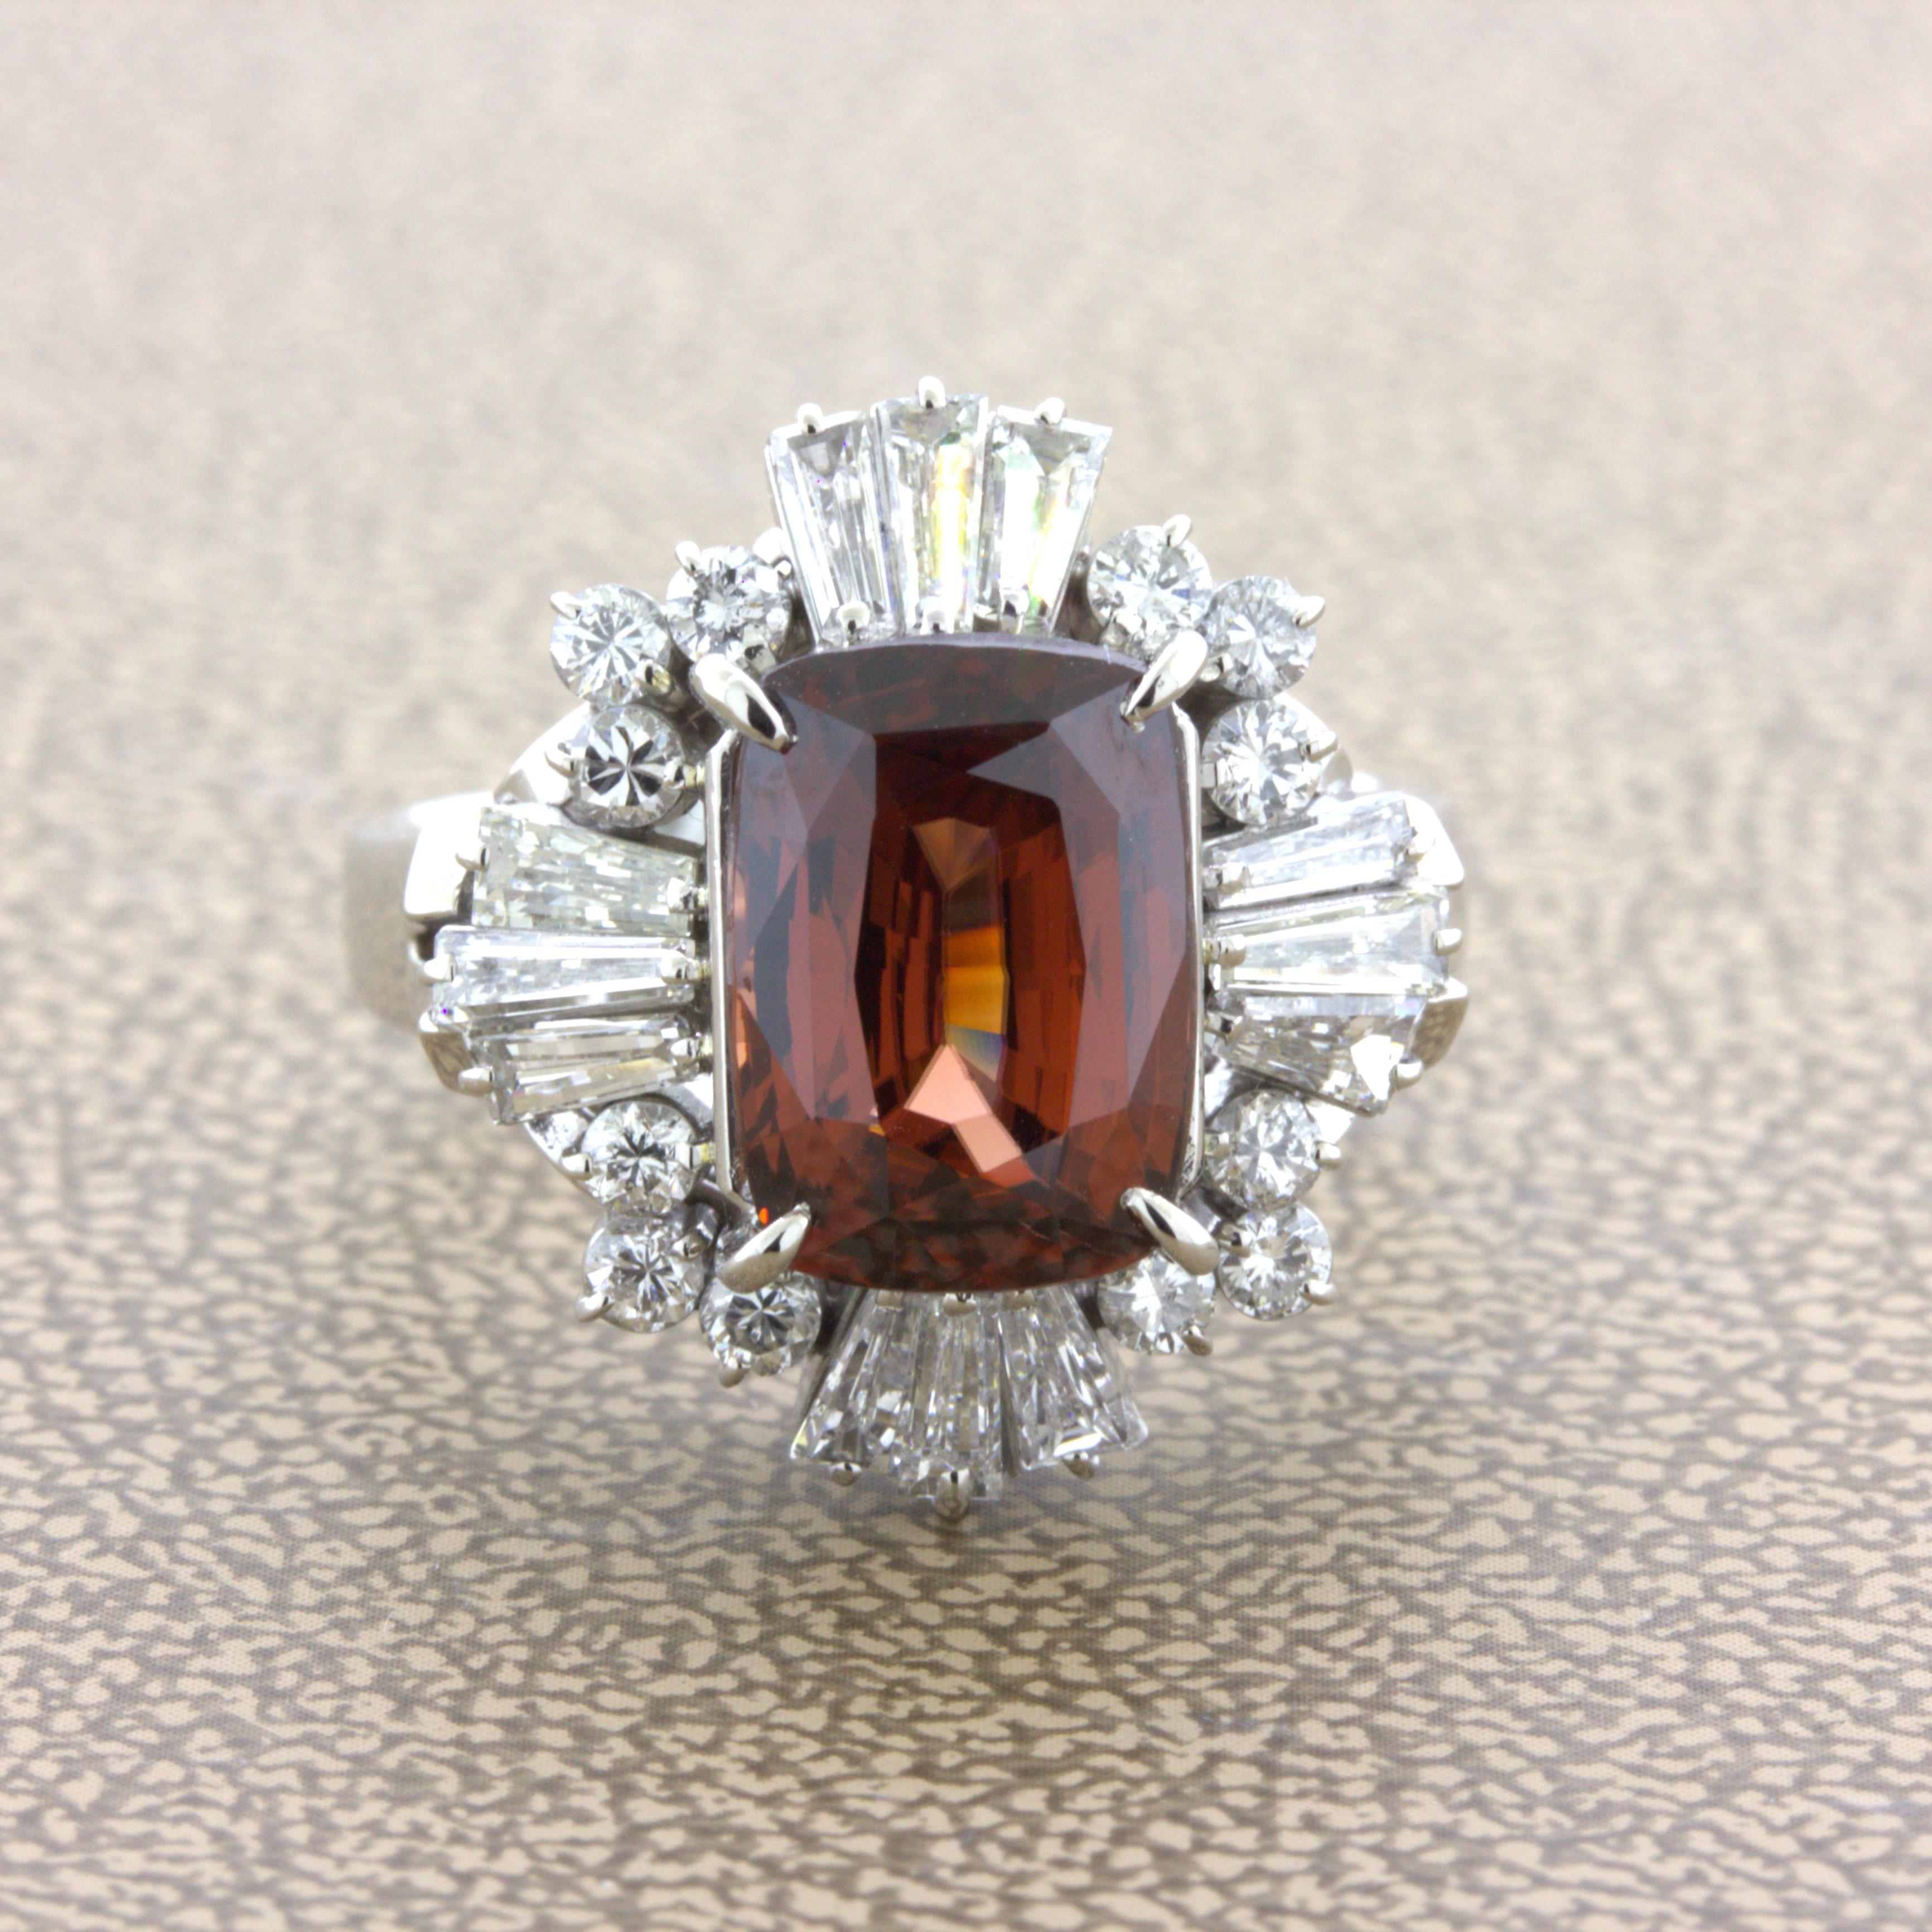 A chic and elegant platinum ring! It features a beautiful zircon weighing 5.21 carats with a unique golden-orange color. The color is both vivid and bright, and with zircon's high dispersion (higher than diamond) the stone radiates in the light. It